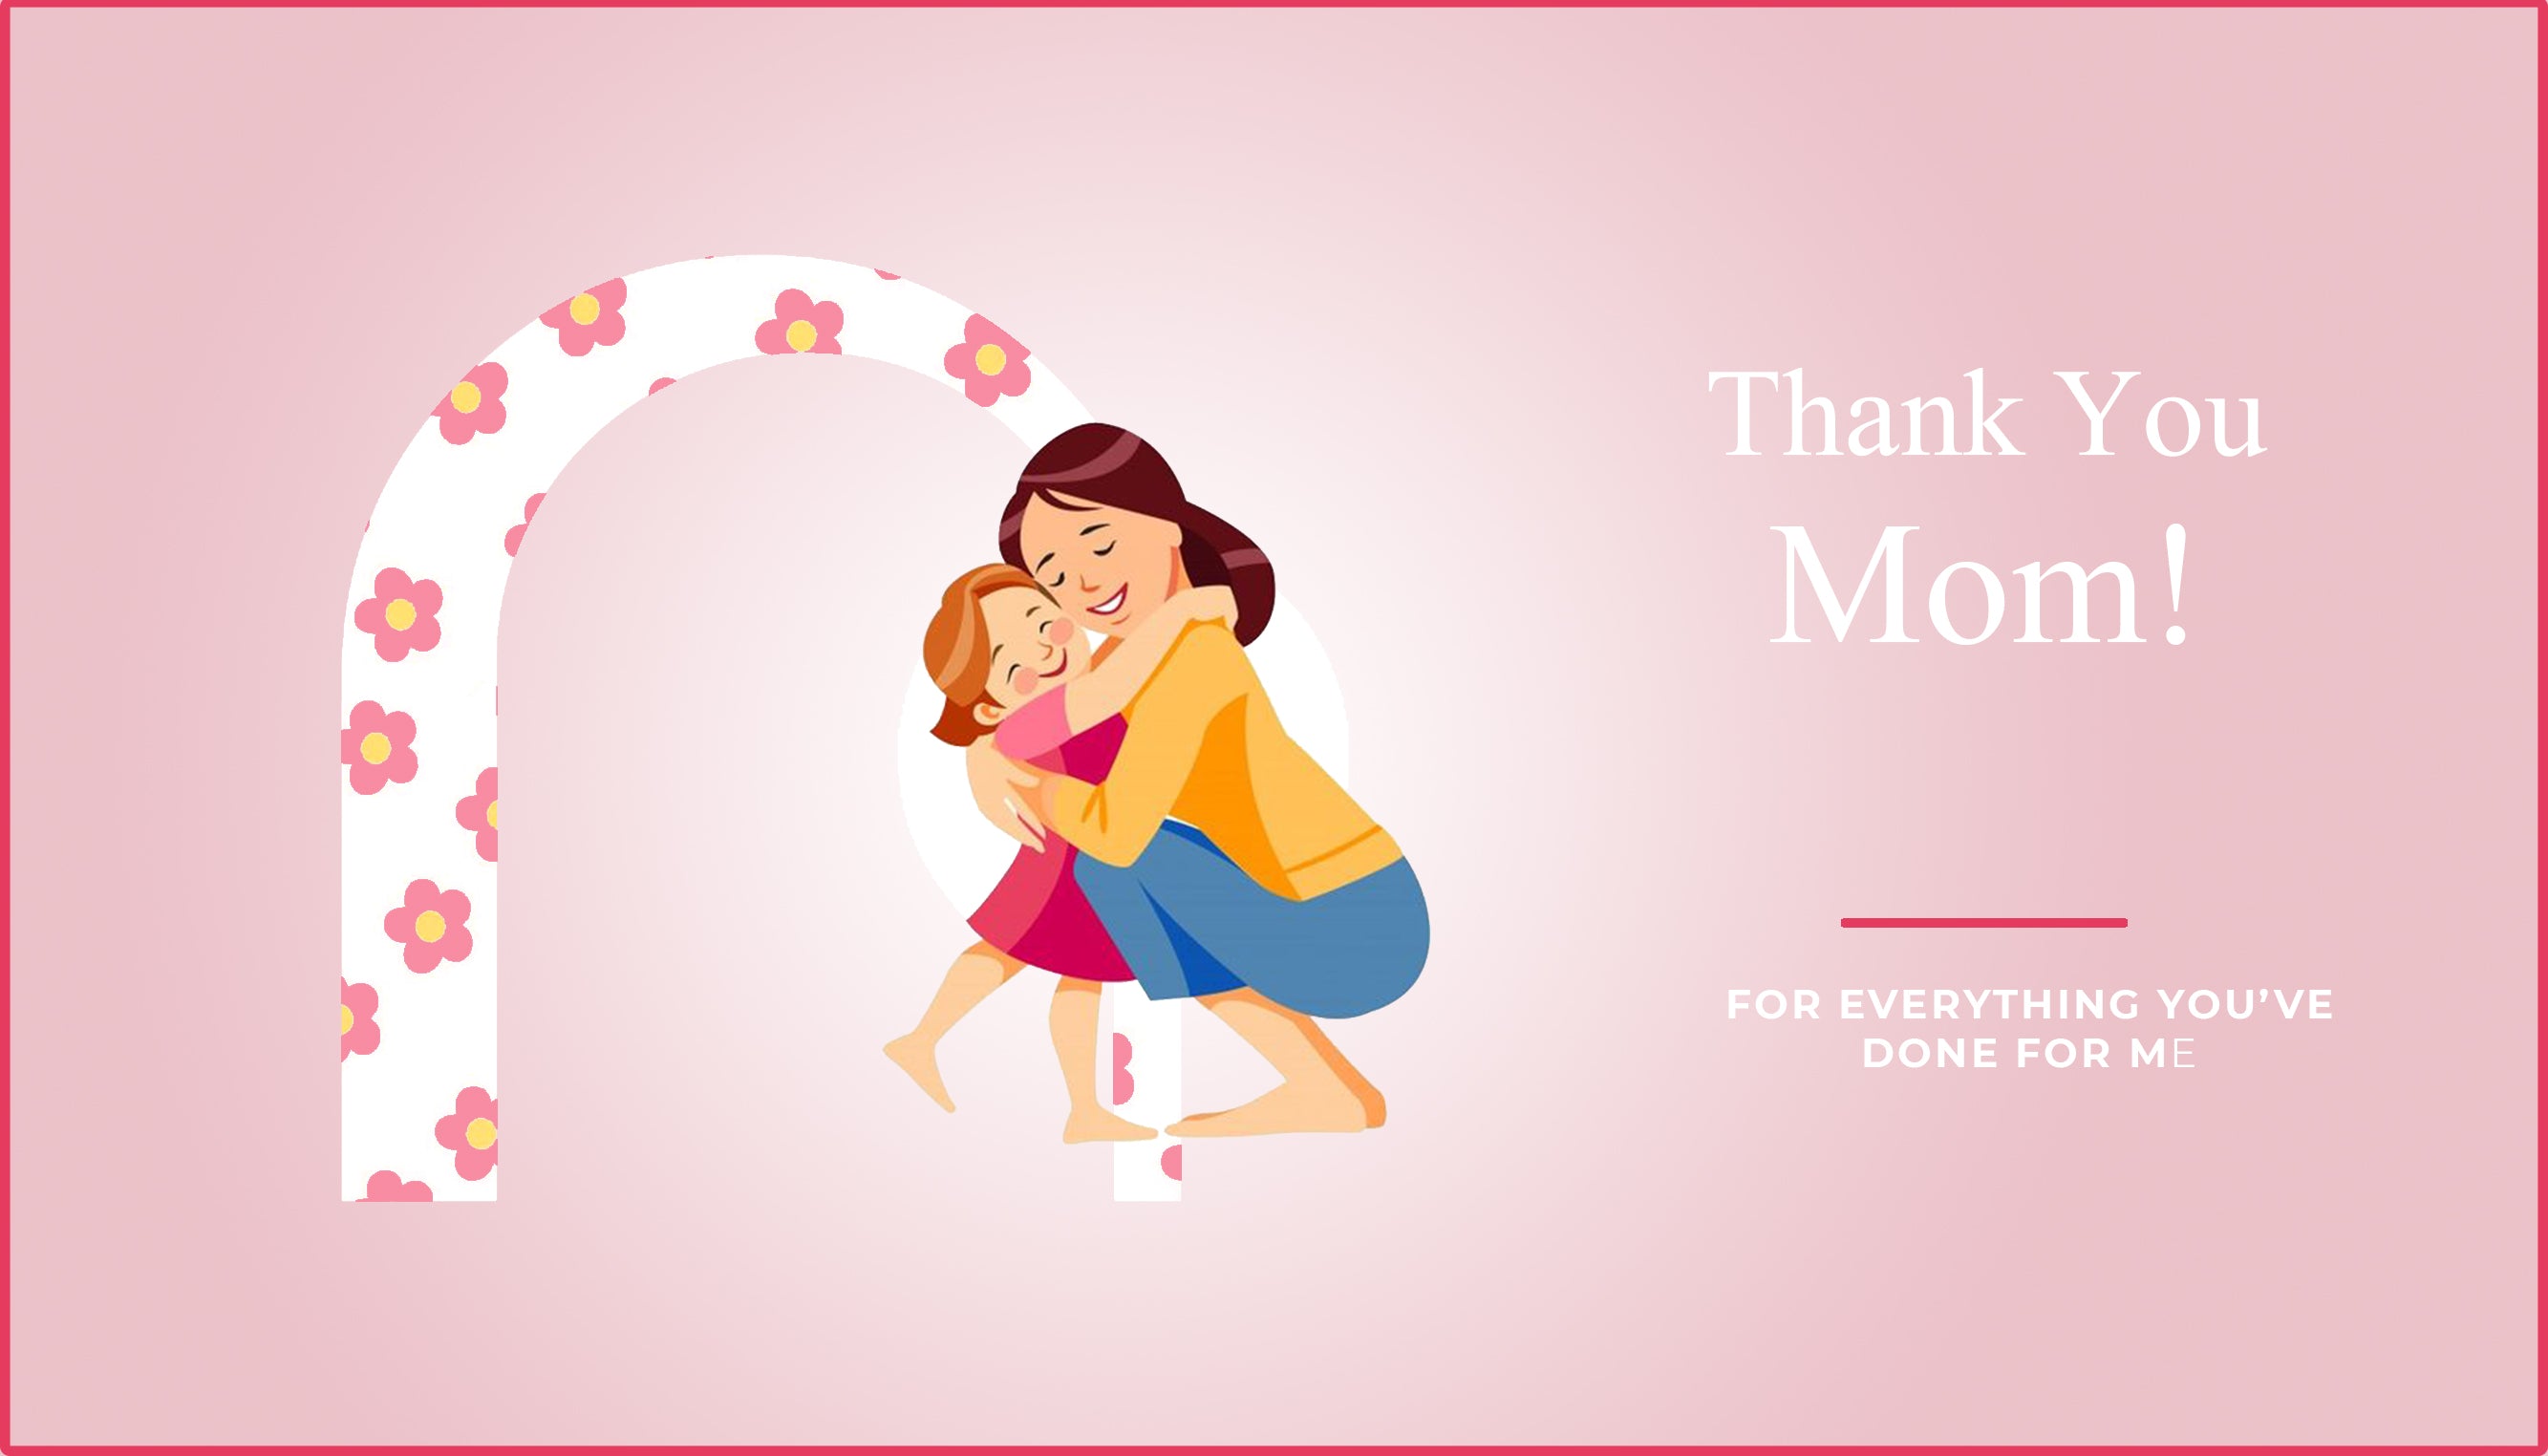 Mom Dad and me photoshoot Gift Card - Rs.2500 : Amazon.in: Gift Cards